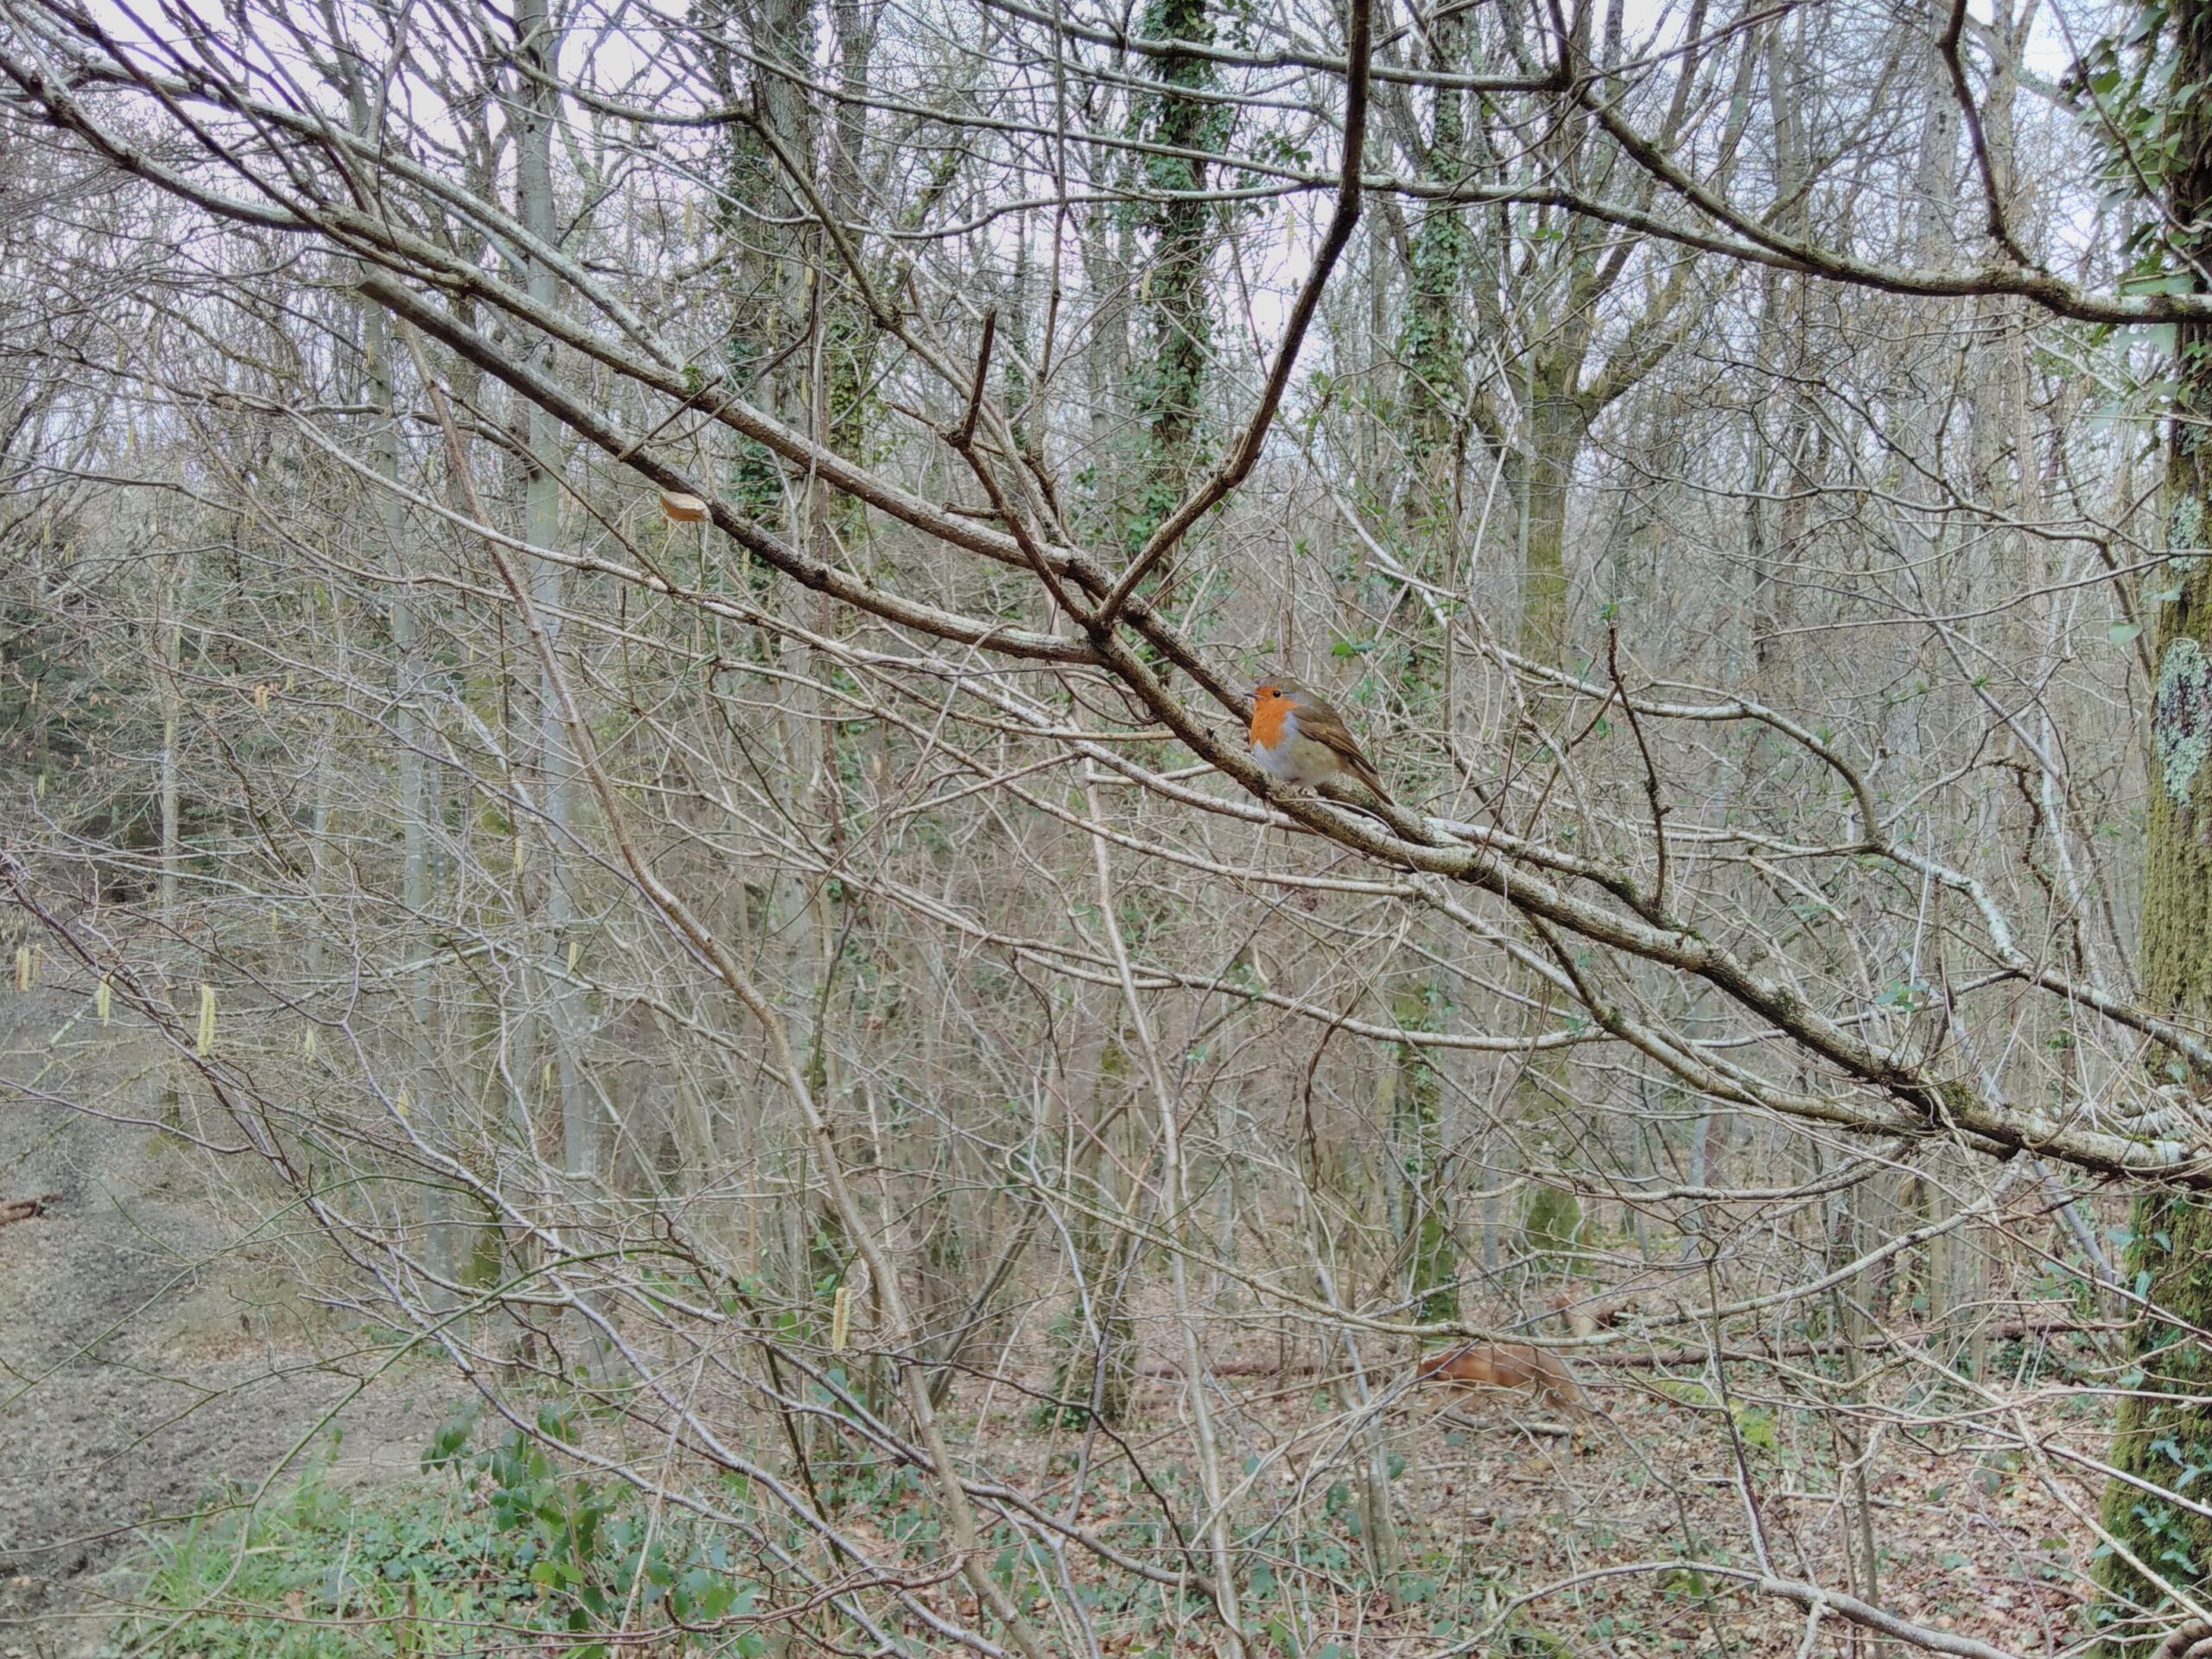 A robin sits on a branch against a background of leafless winter woodland.